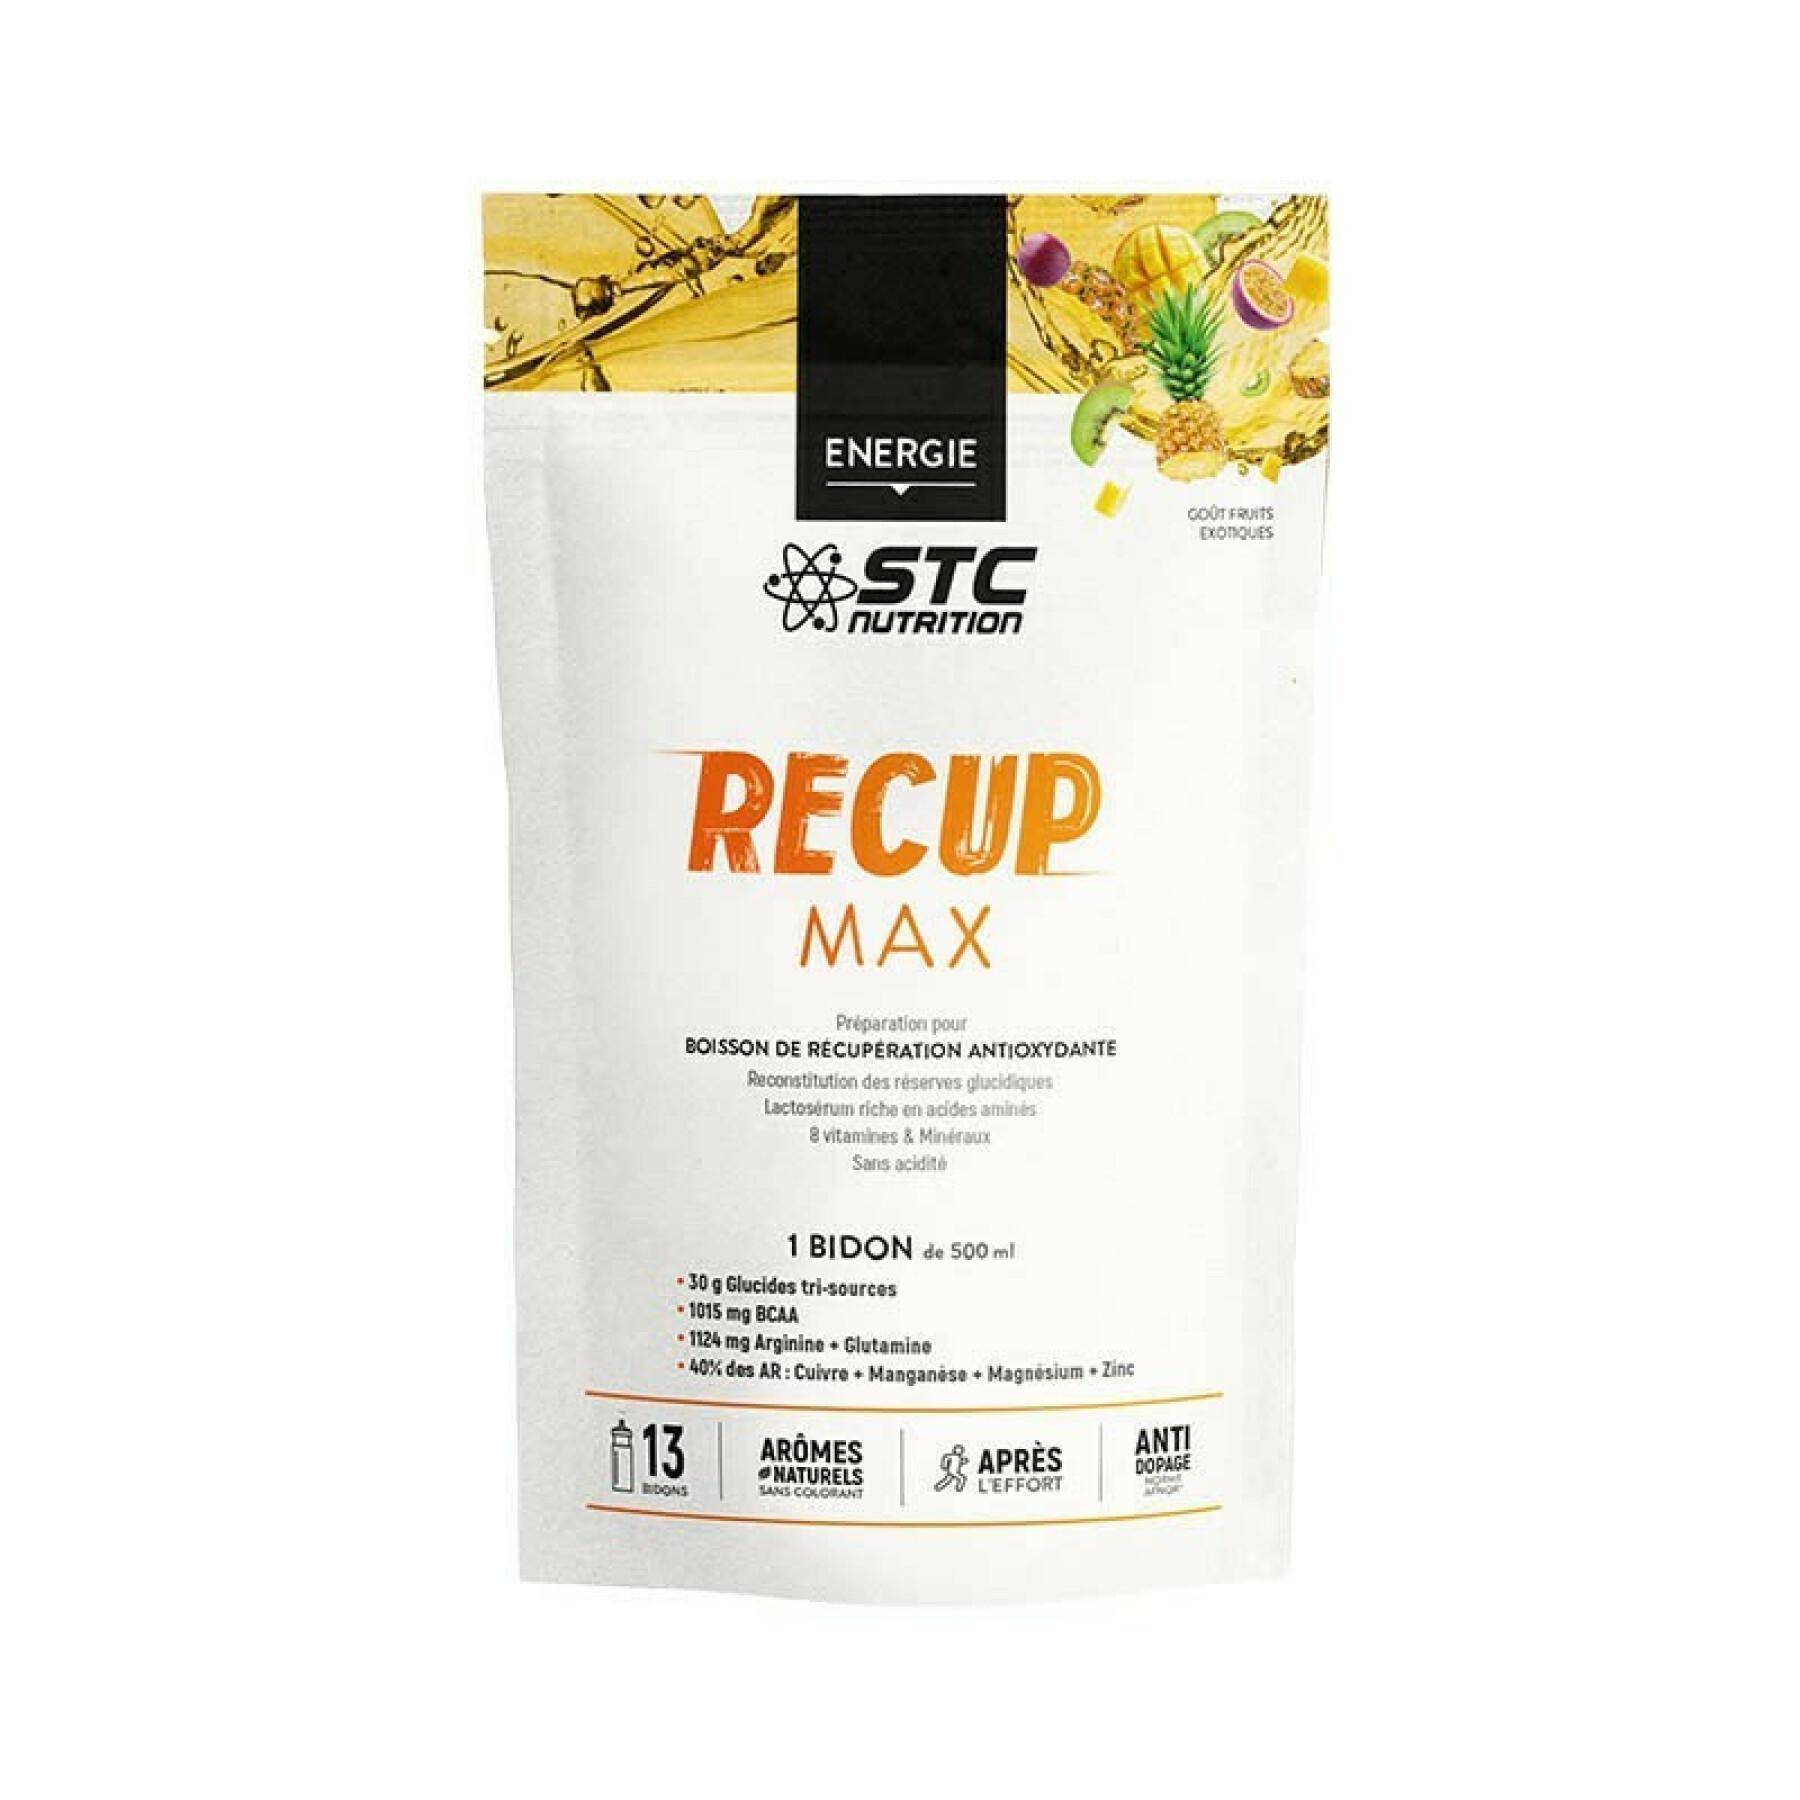 Doypack recup max med mätsked STC Nutrition - fruits exotiques -525g